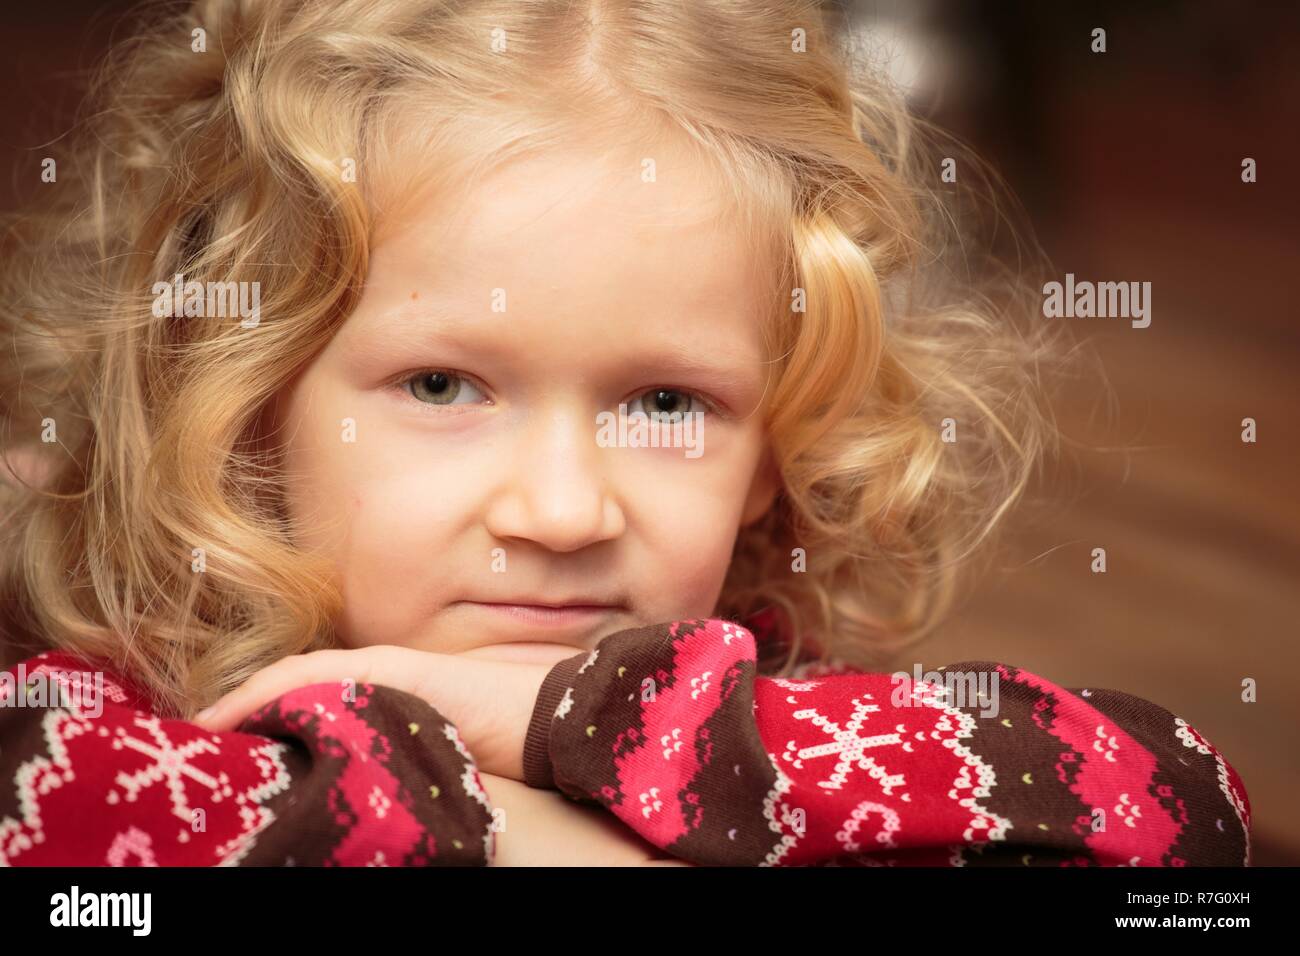 portrait of smiling curly little girl indoors Stock Photo